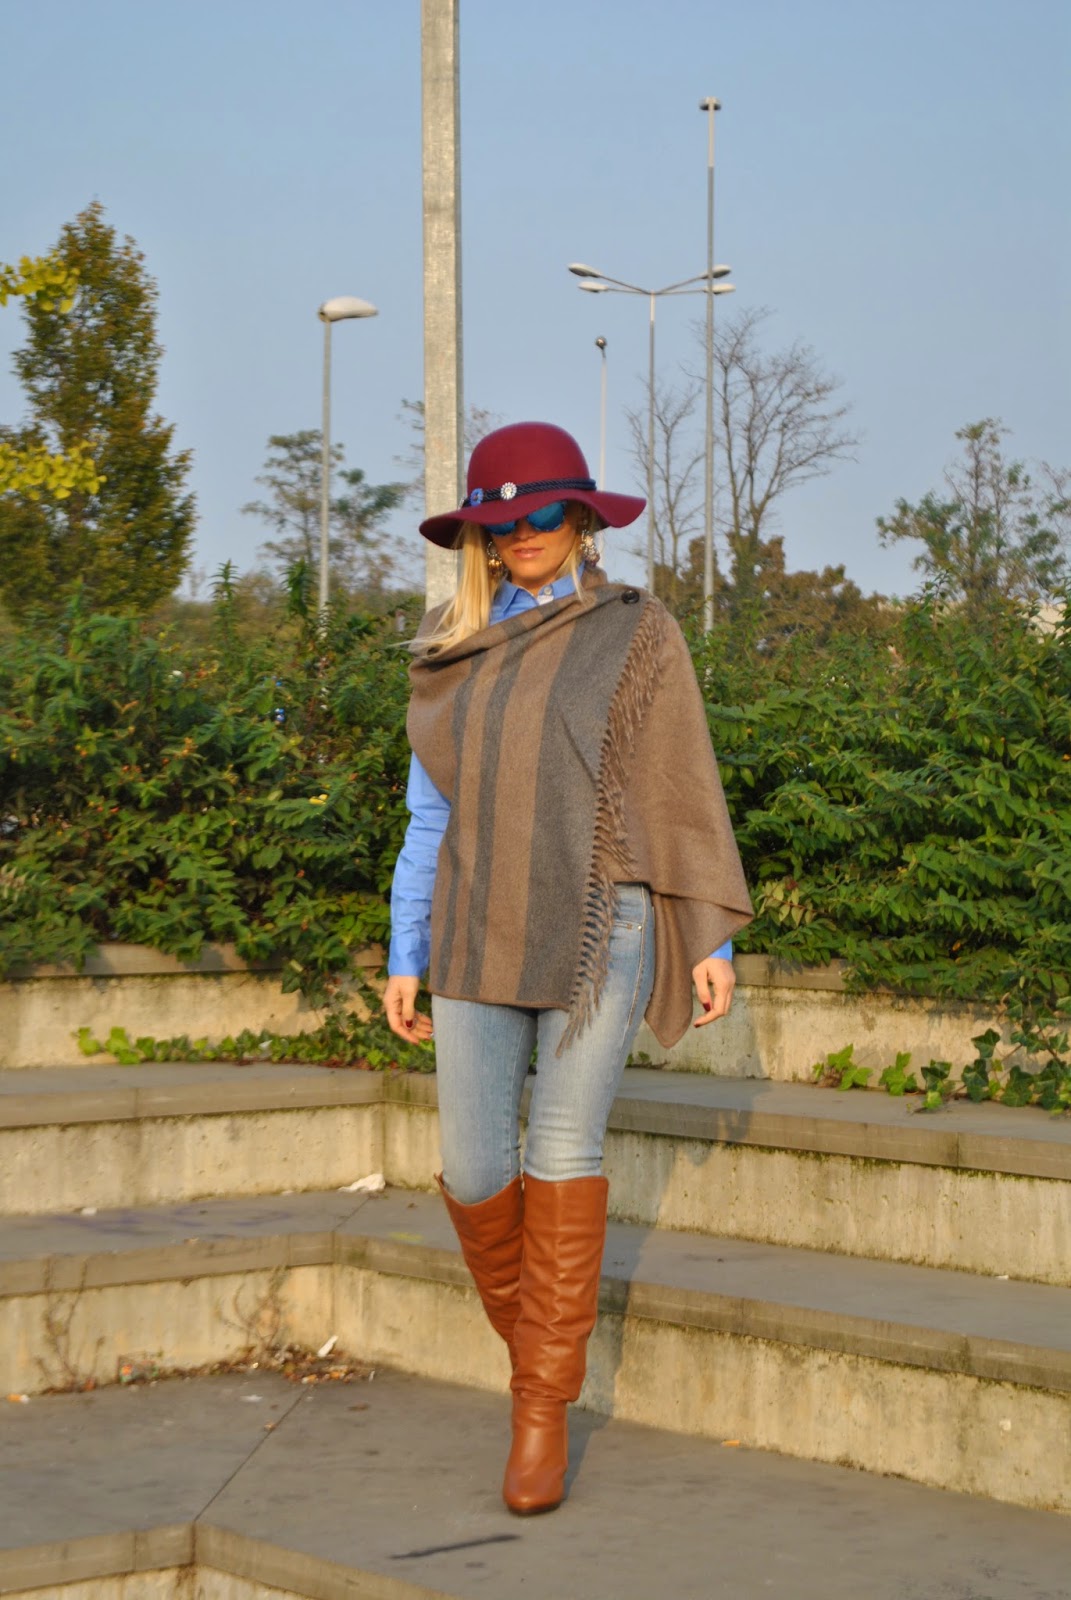  autumnal outfit  how to wear cape outfit cape cape street style outfit hat fashion bloggers italy italian girl  outfit mantella outfit casual abbinamenti mantella outfit jeans e mantella outfit stivali cuissardes outfit camicia azzurra outfit jeans fornarina come abbinare la mantella outfit cappello zara jeans e stivali abbinamenti stivali e jeans orecchini majique majique london earringss zara hat fornarina botton up mantella liu jo how to wear cape outfit cape outfit autunnali outfit casual autunnali outfit ottobre 2014 fashion blogger italiane fashion blogger bionde mariafelicia magno fashion blogger outfit colorblock by felym mariafelicia magno fashion blogger di color block by felym come abbinare il cappello cappello burgundy majique london earrings occhiali da sole con lenti a specchio azzurre excape